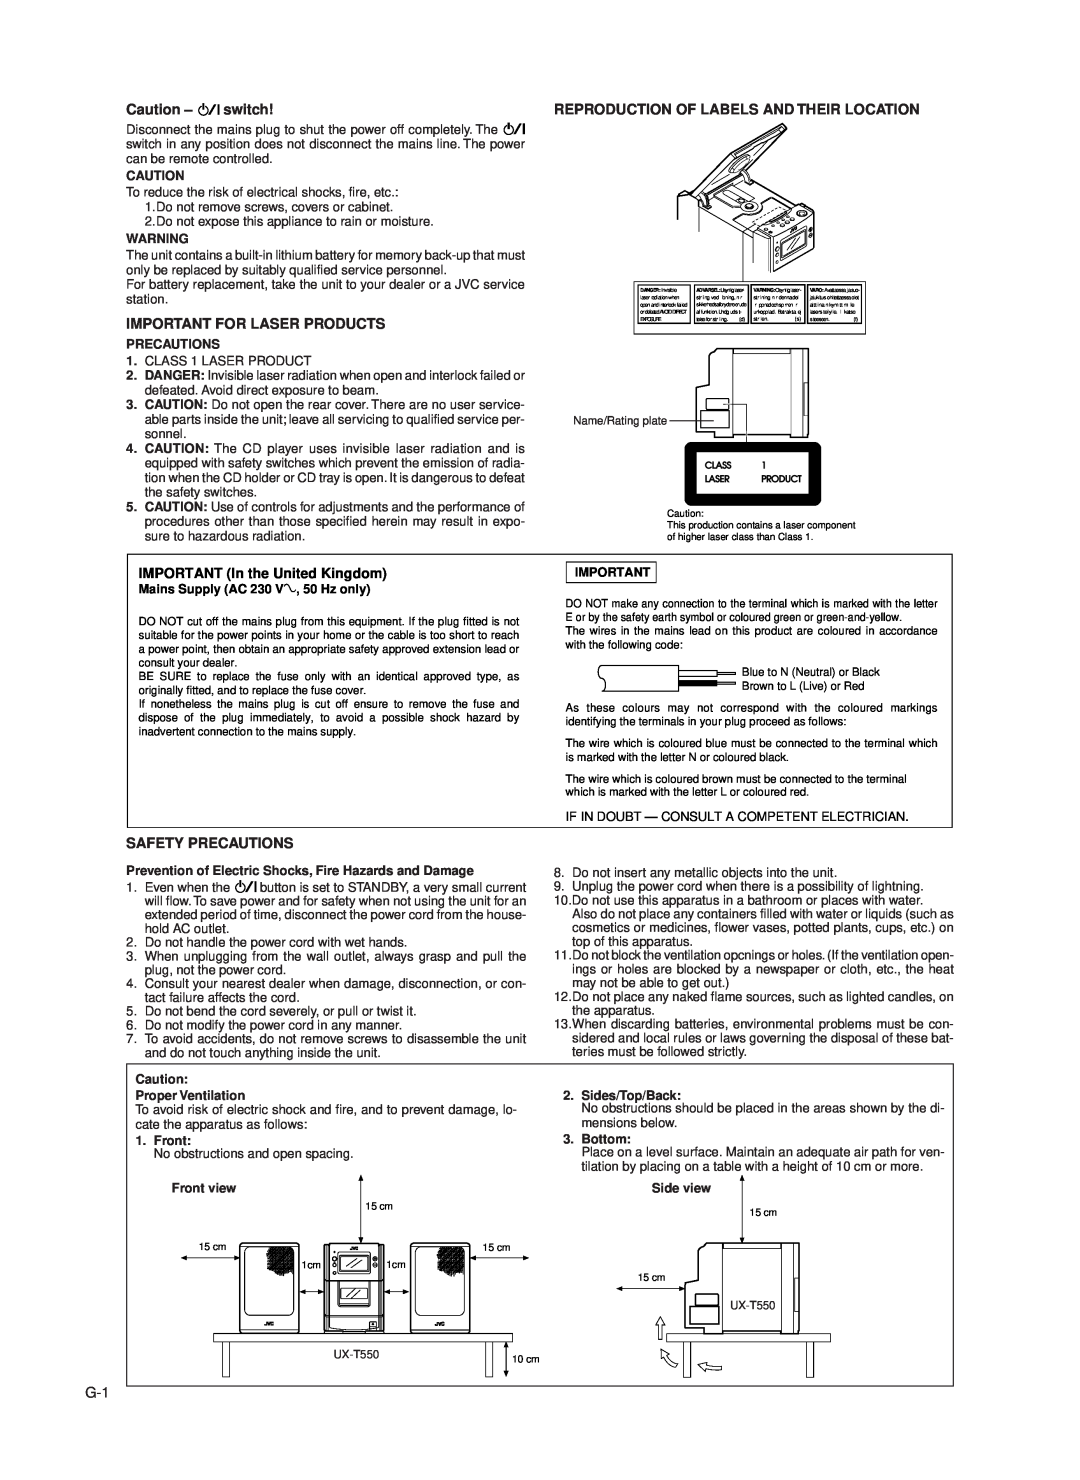 JVC UX-T550 Caution -switch, Important For Laser Products, Reproduction Of Labels And Their Location, Safety Precautions 